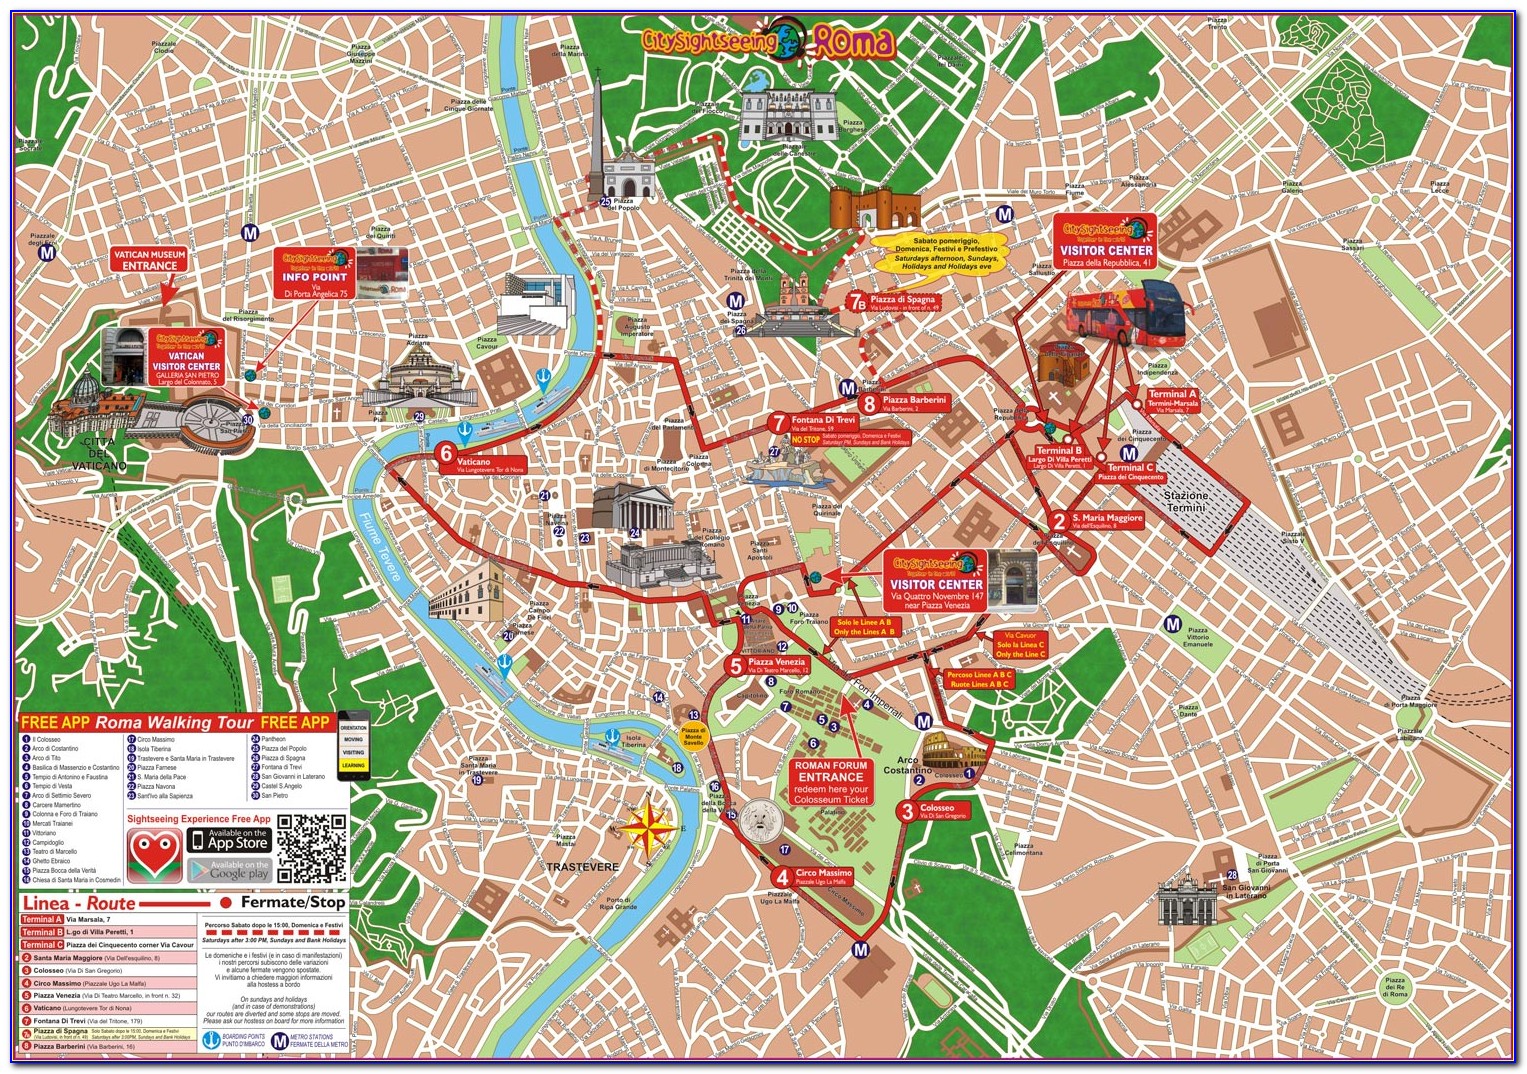 Florence Italy Hop On Hop Off Bus Map